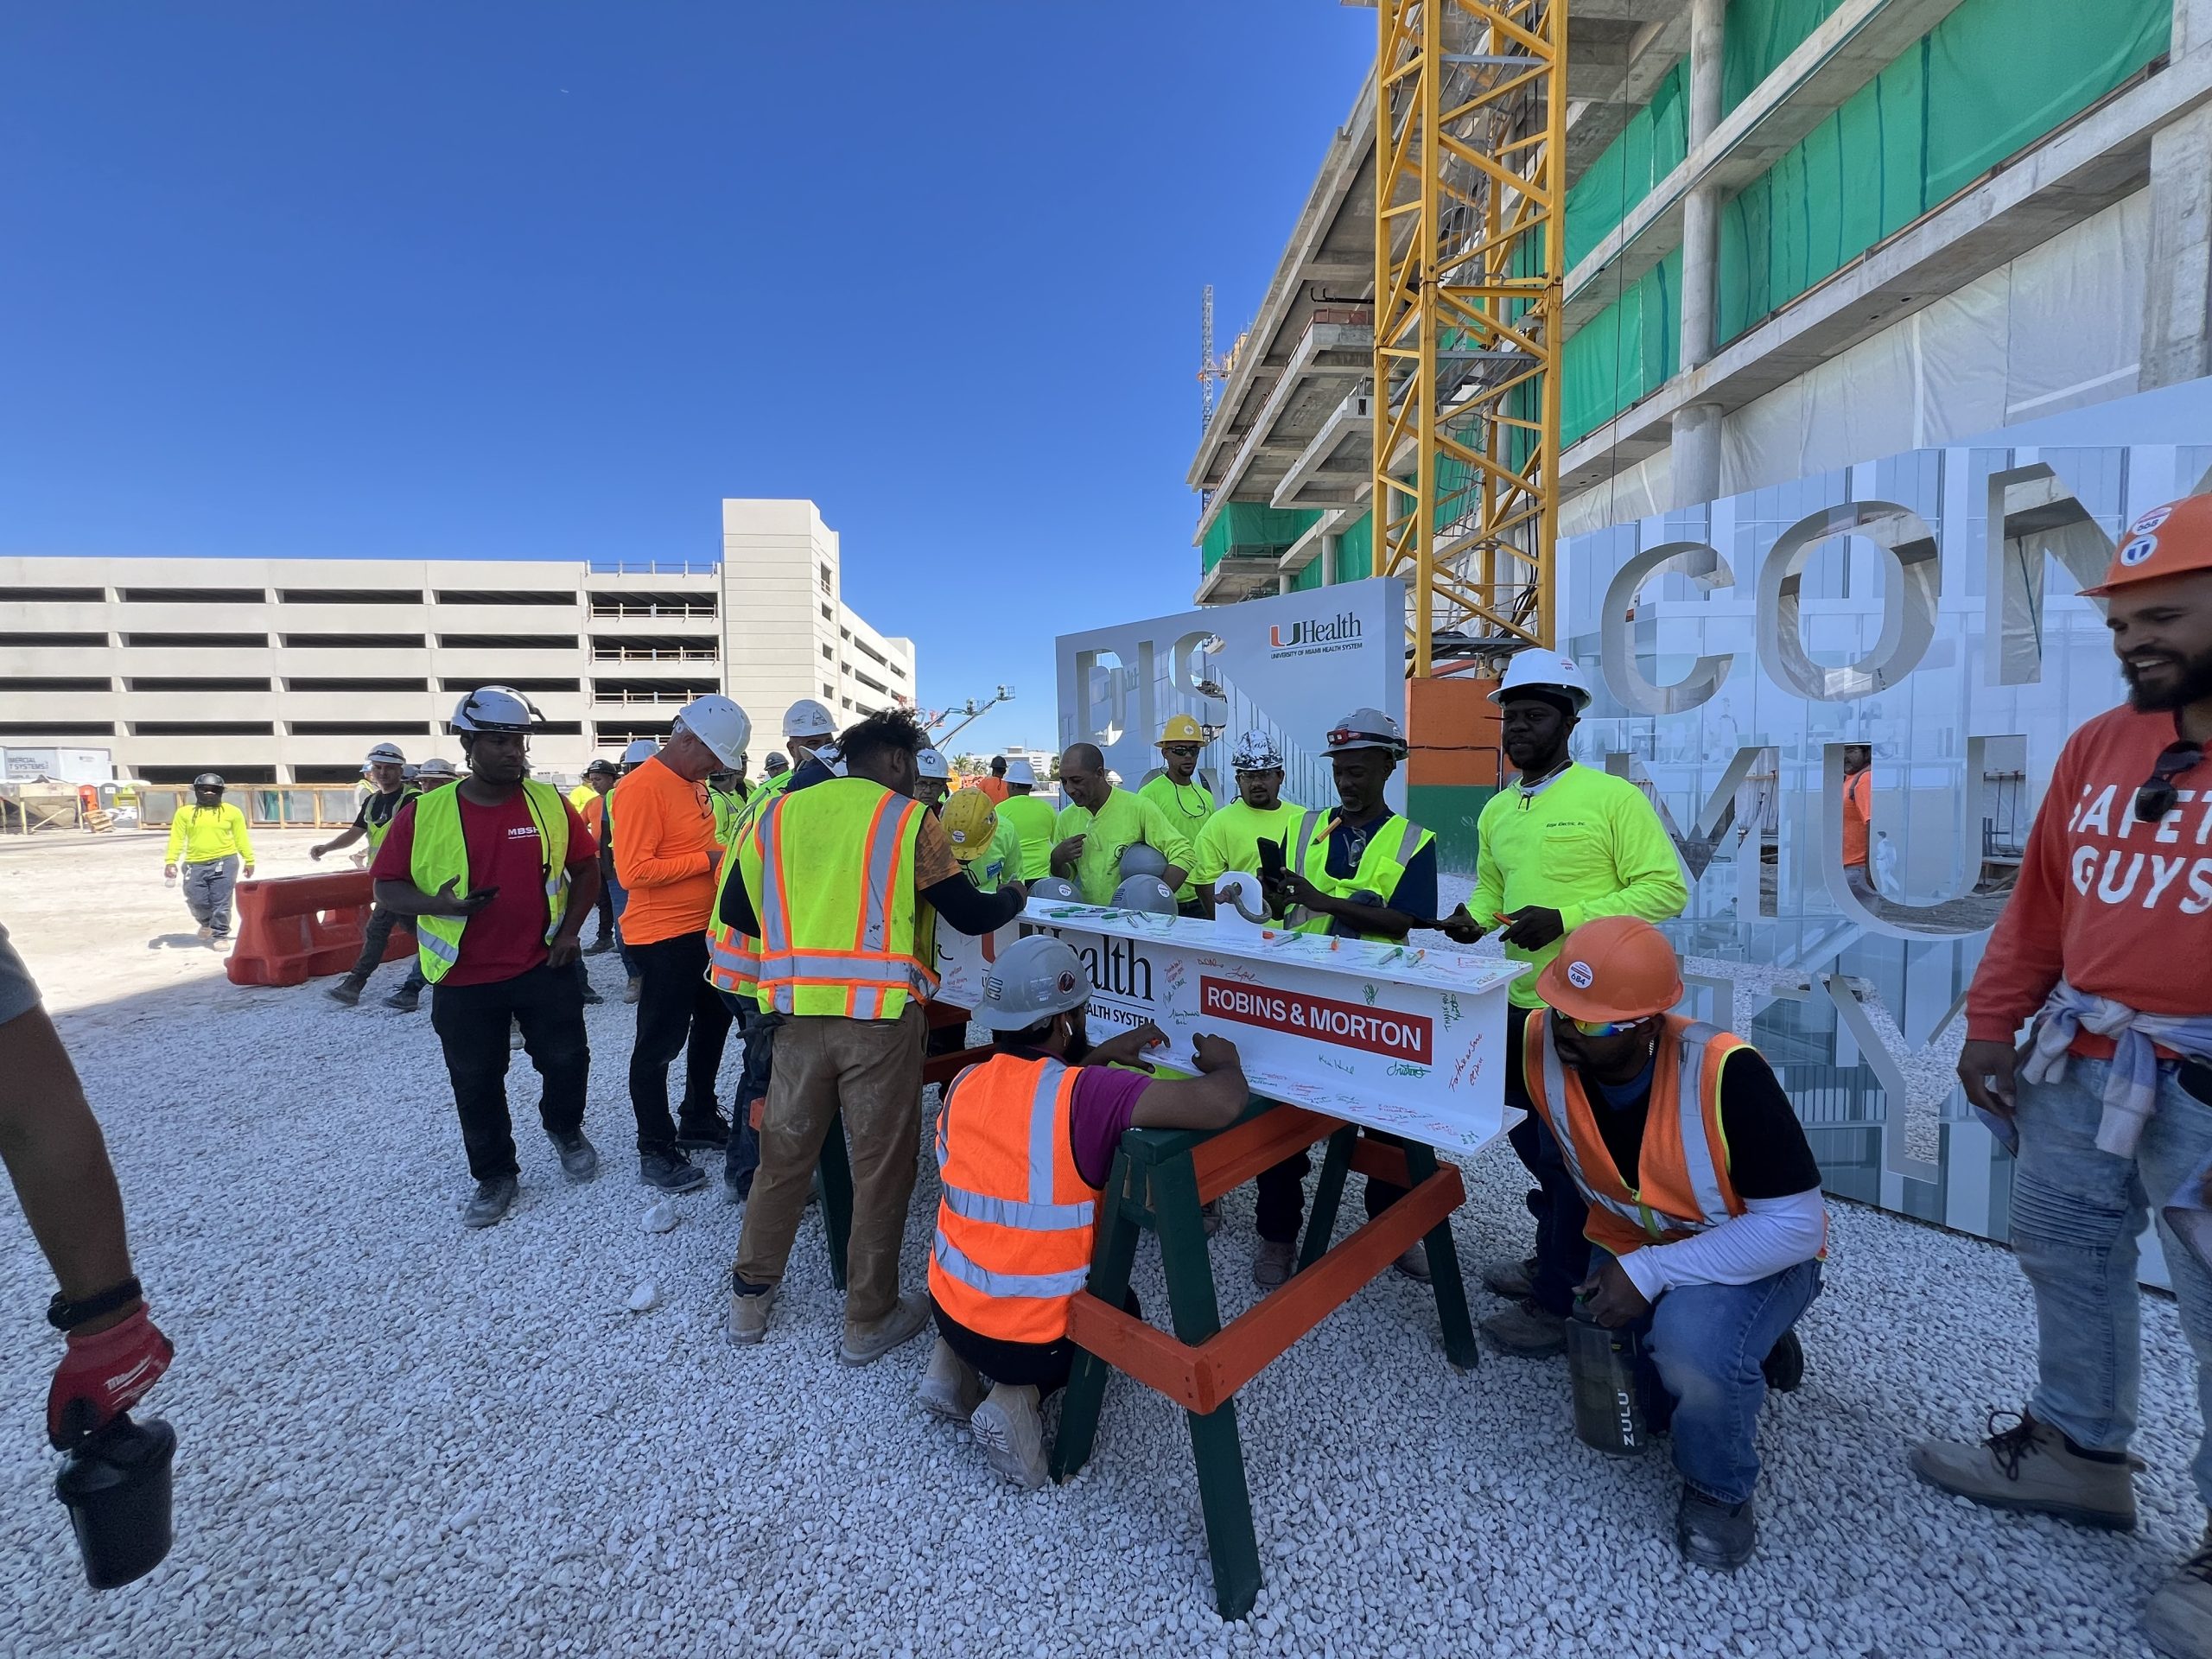 UHealth at SoLe Mia topping out